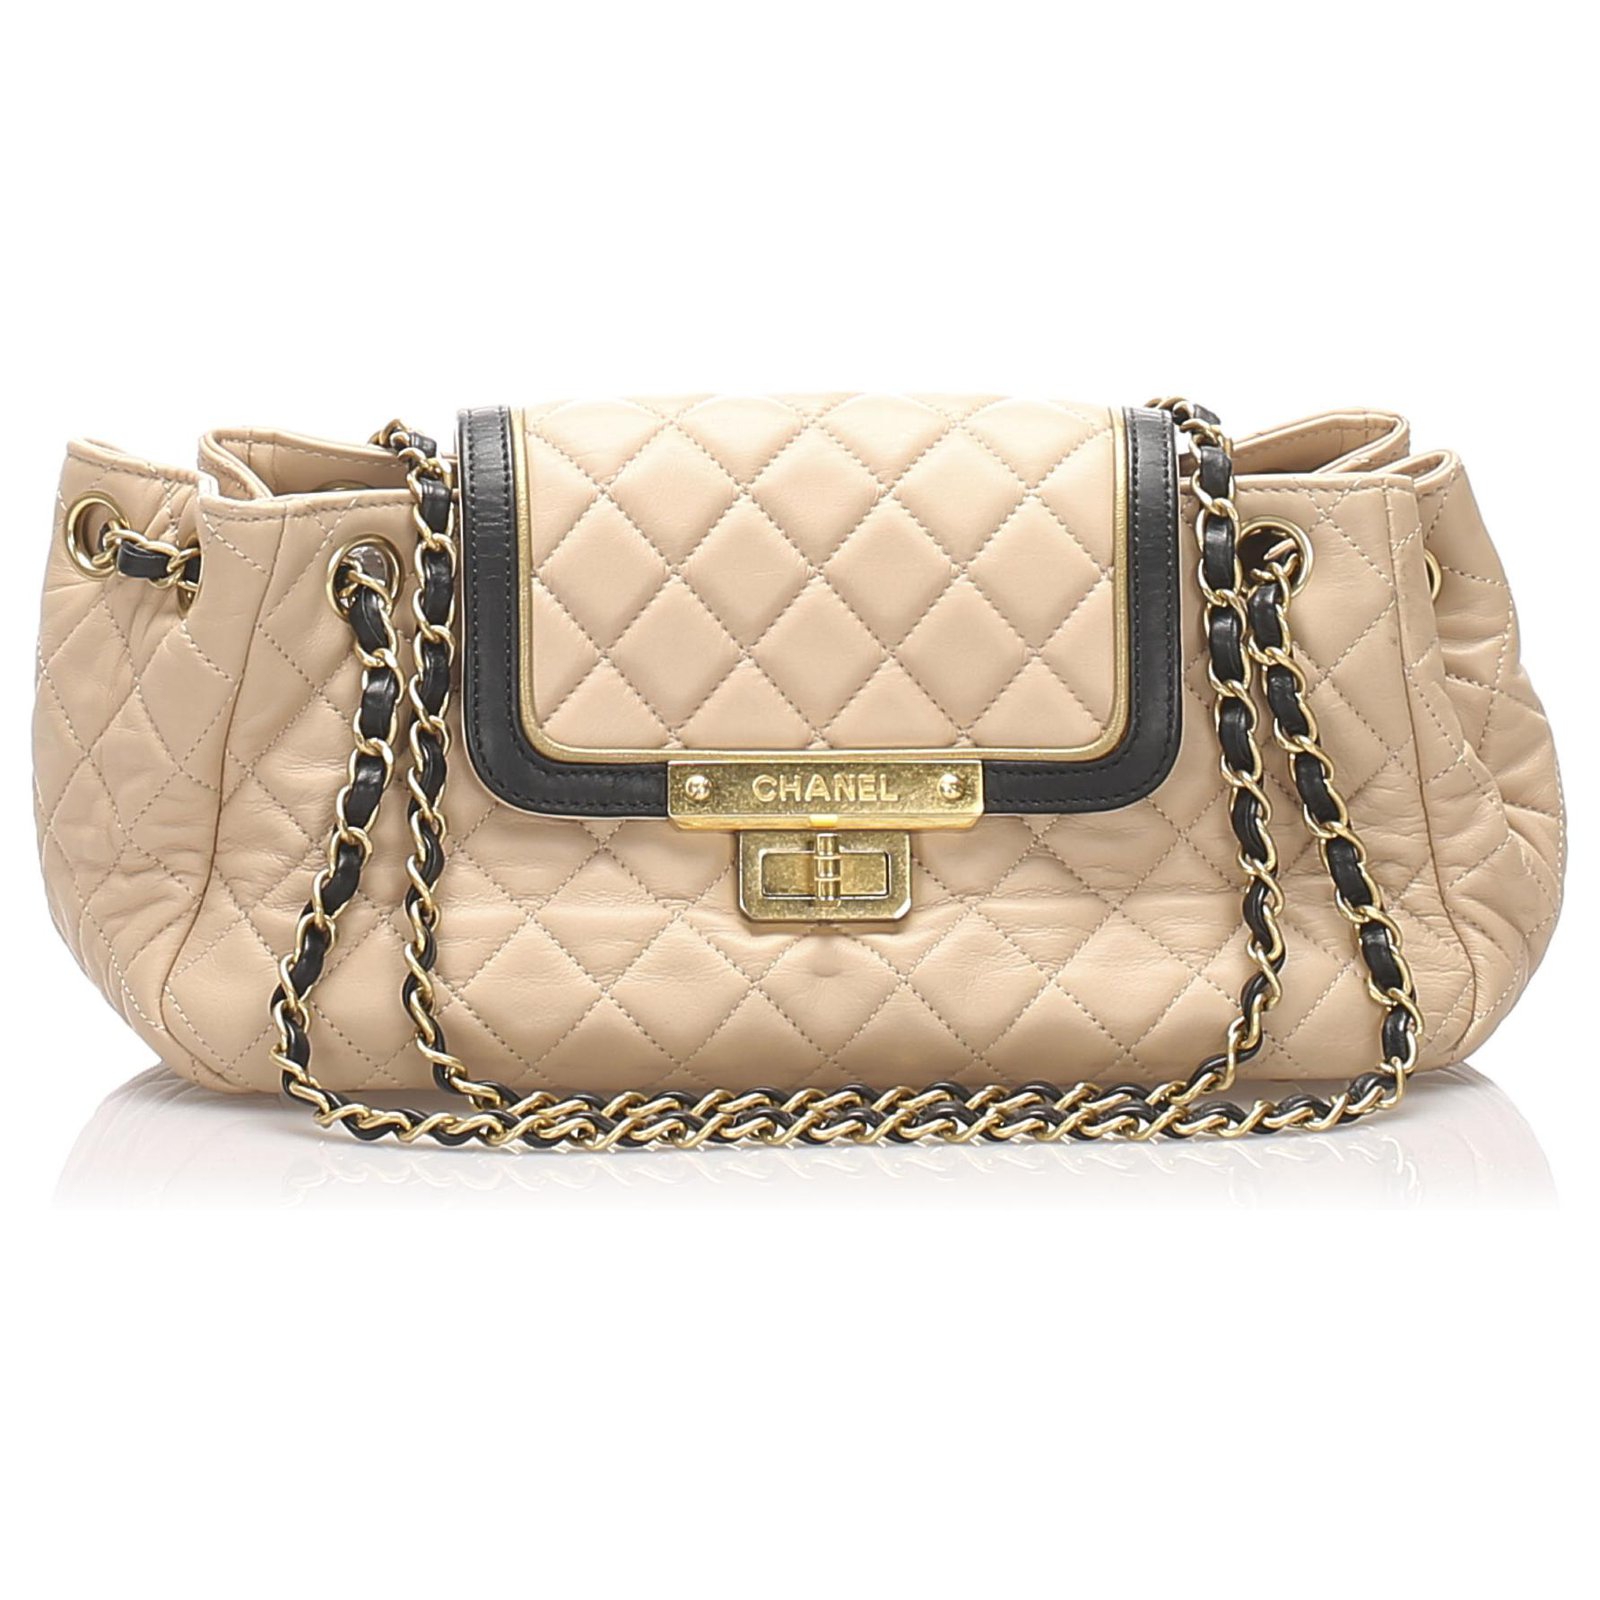 CHANEL East West Accordion Flap Quilted Calfskin Leather Shoulder Bag